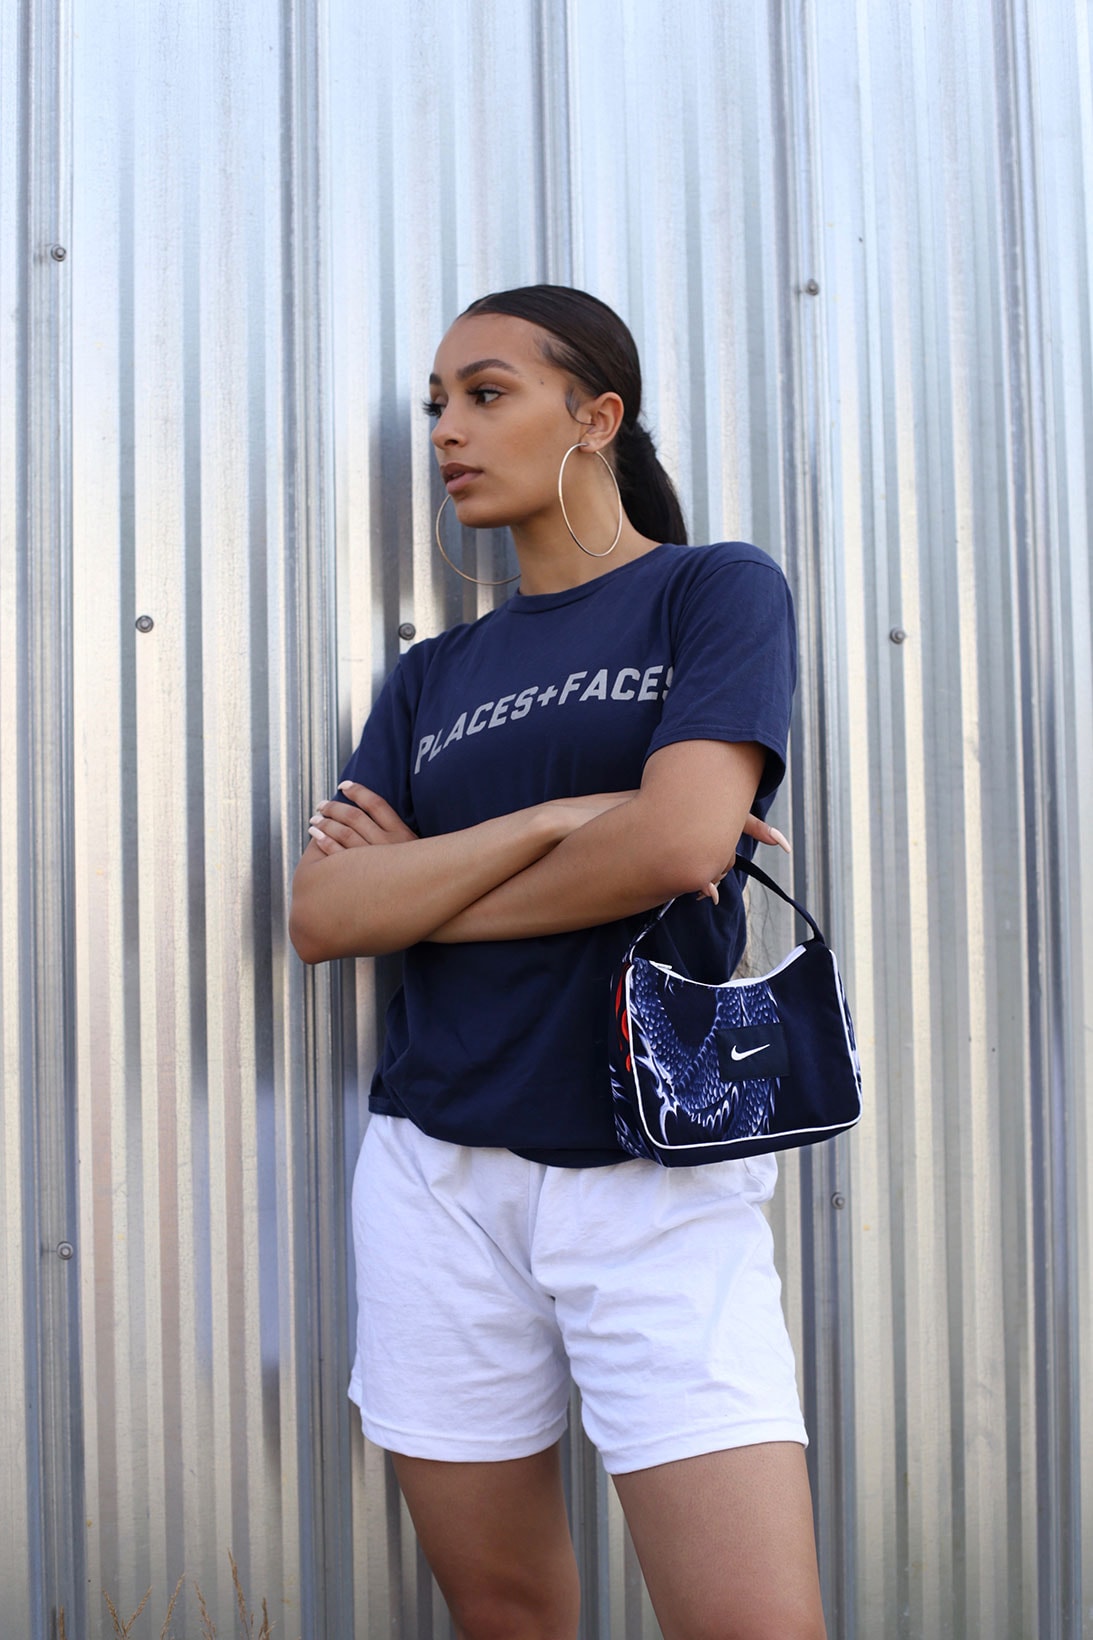 frankie collective handbags vintage rework nike louis vuitton burberry sustainable affordable